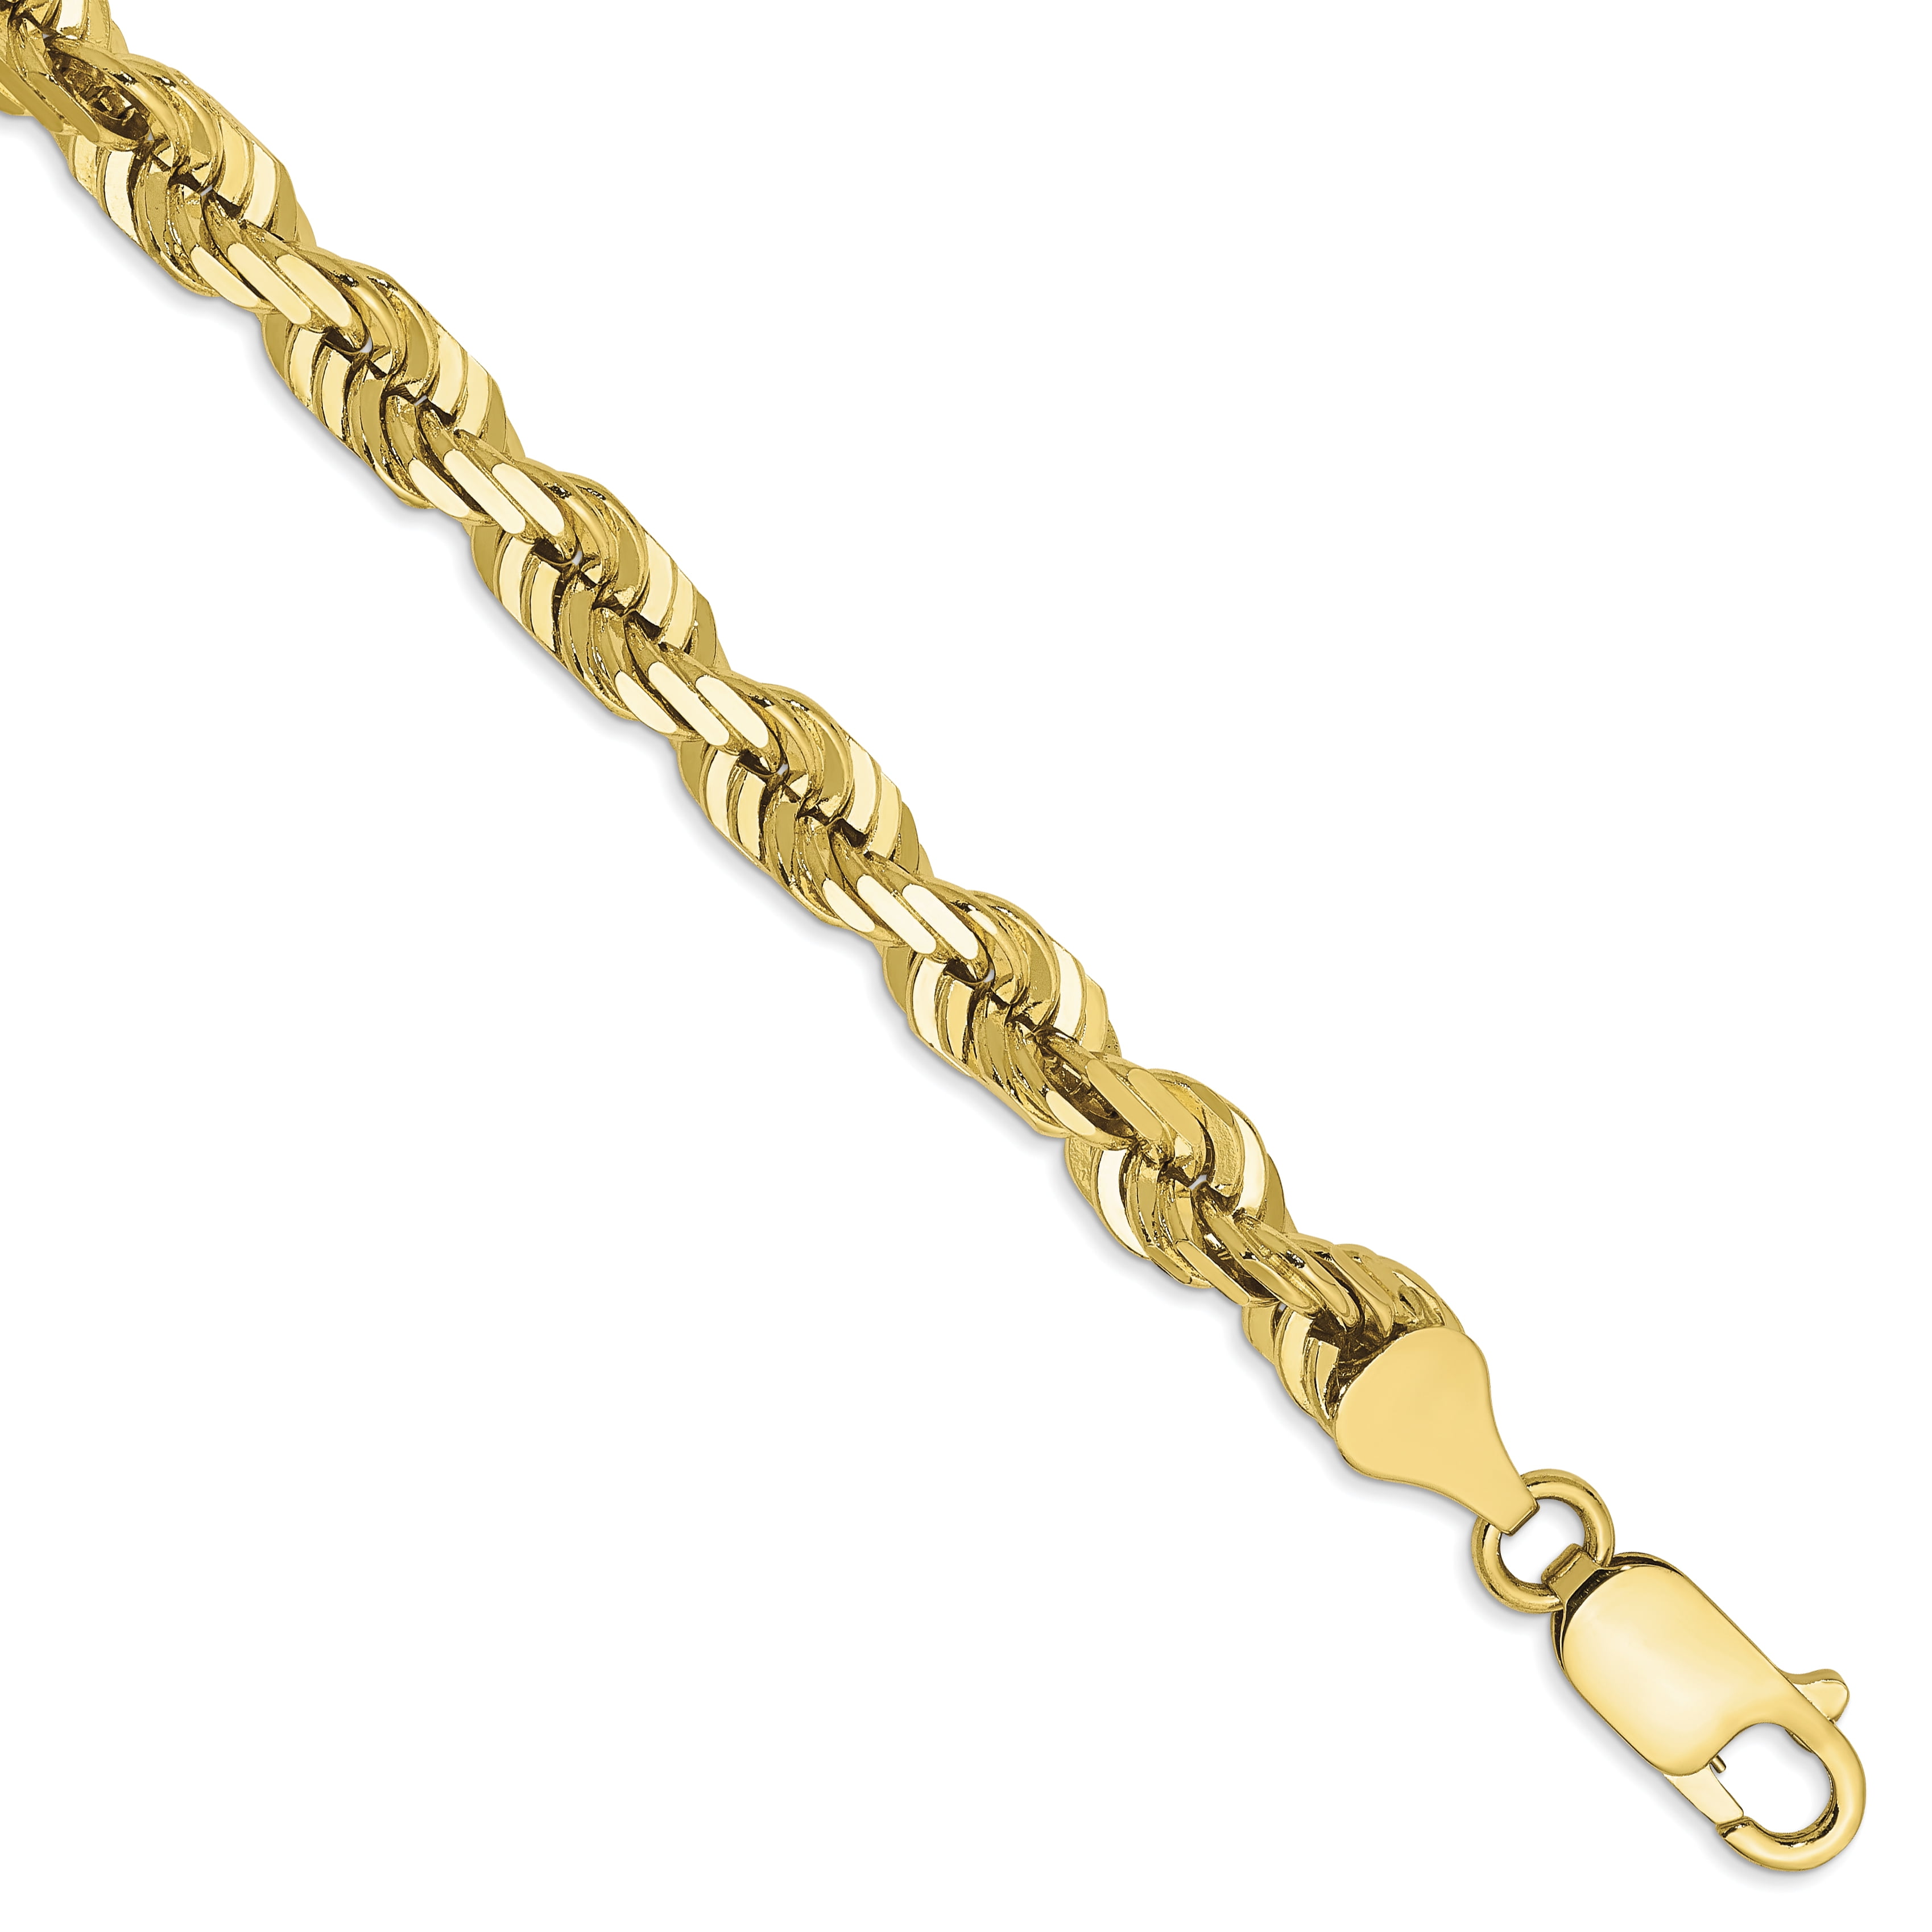 10k .6mm Solid Diamond-Cut Cable Chain